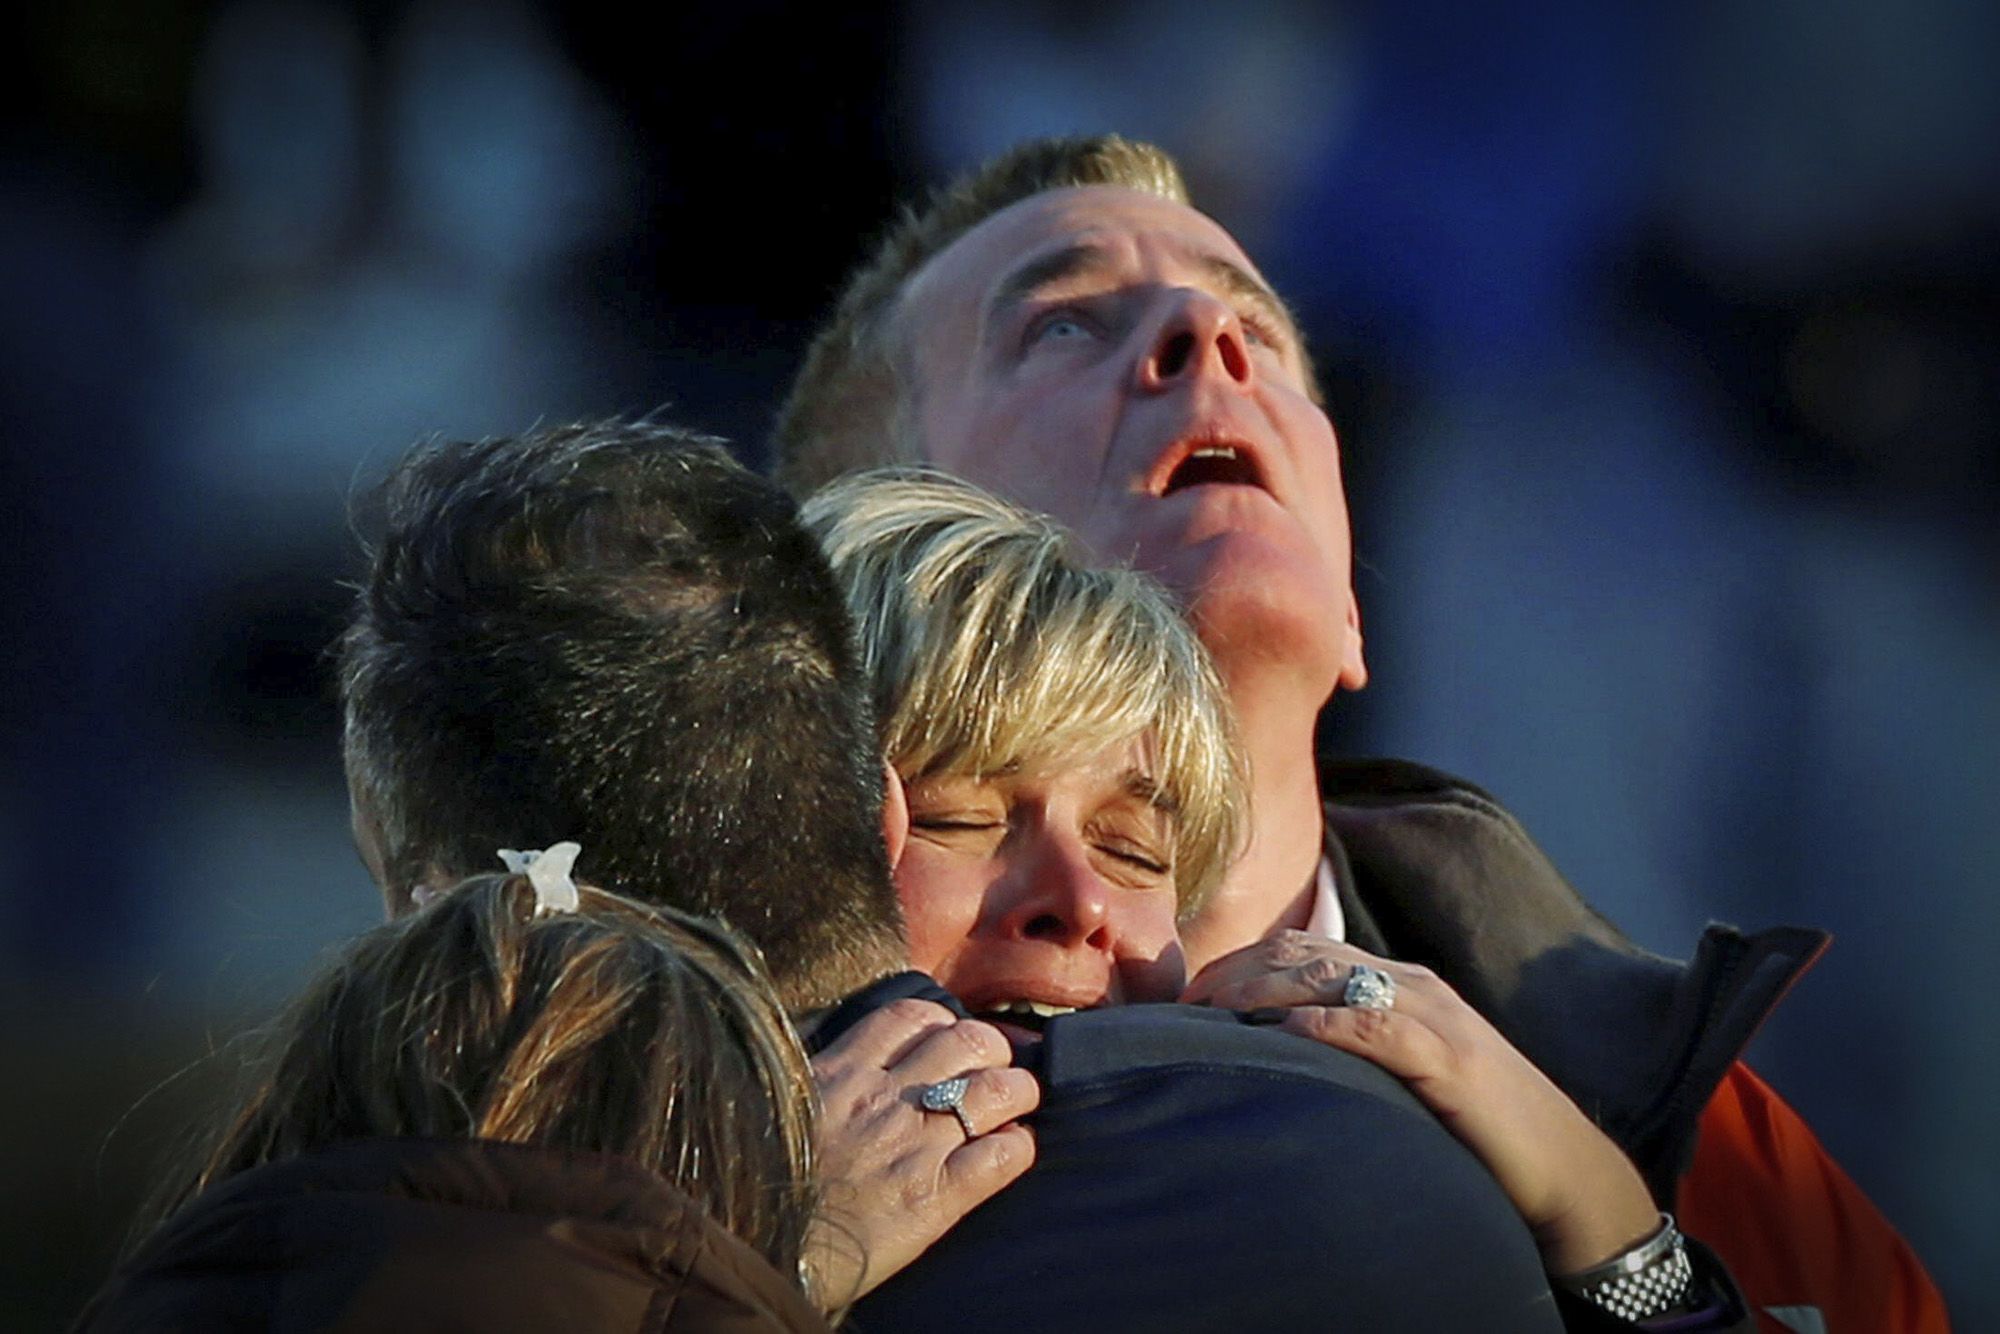 Lynn and Christopher McDonnell, the parents of seven-year-old Grace McDonnell, grieve near Sandy Hook Elementary after learning their daughter was one of 20 school children and six adults killed after a gunman opened fire inside the school in Newtown, Conn., on Dec. 14, 2012. (Adrees Latif / Reuters via Alamy)